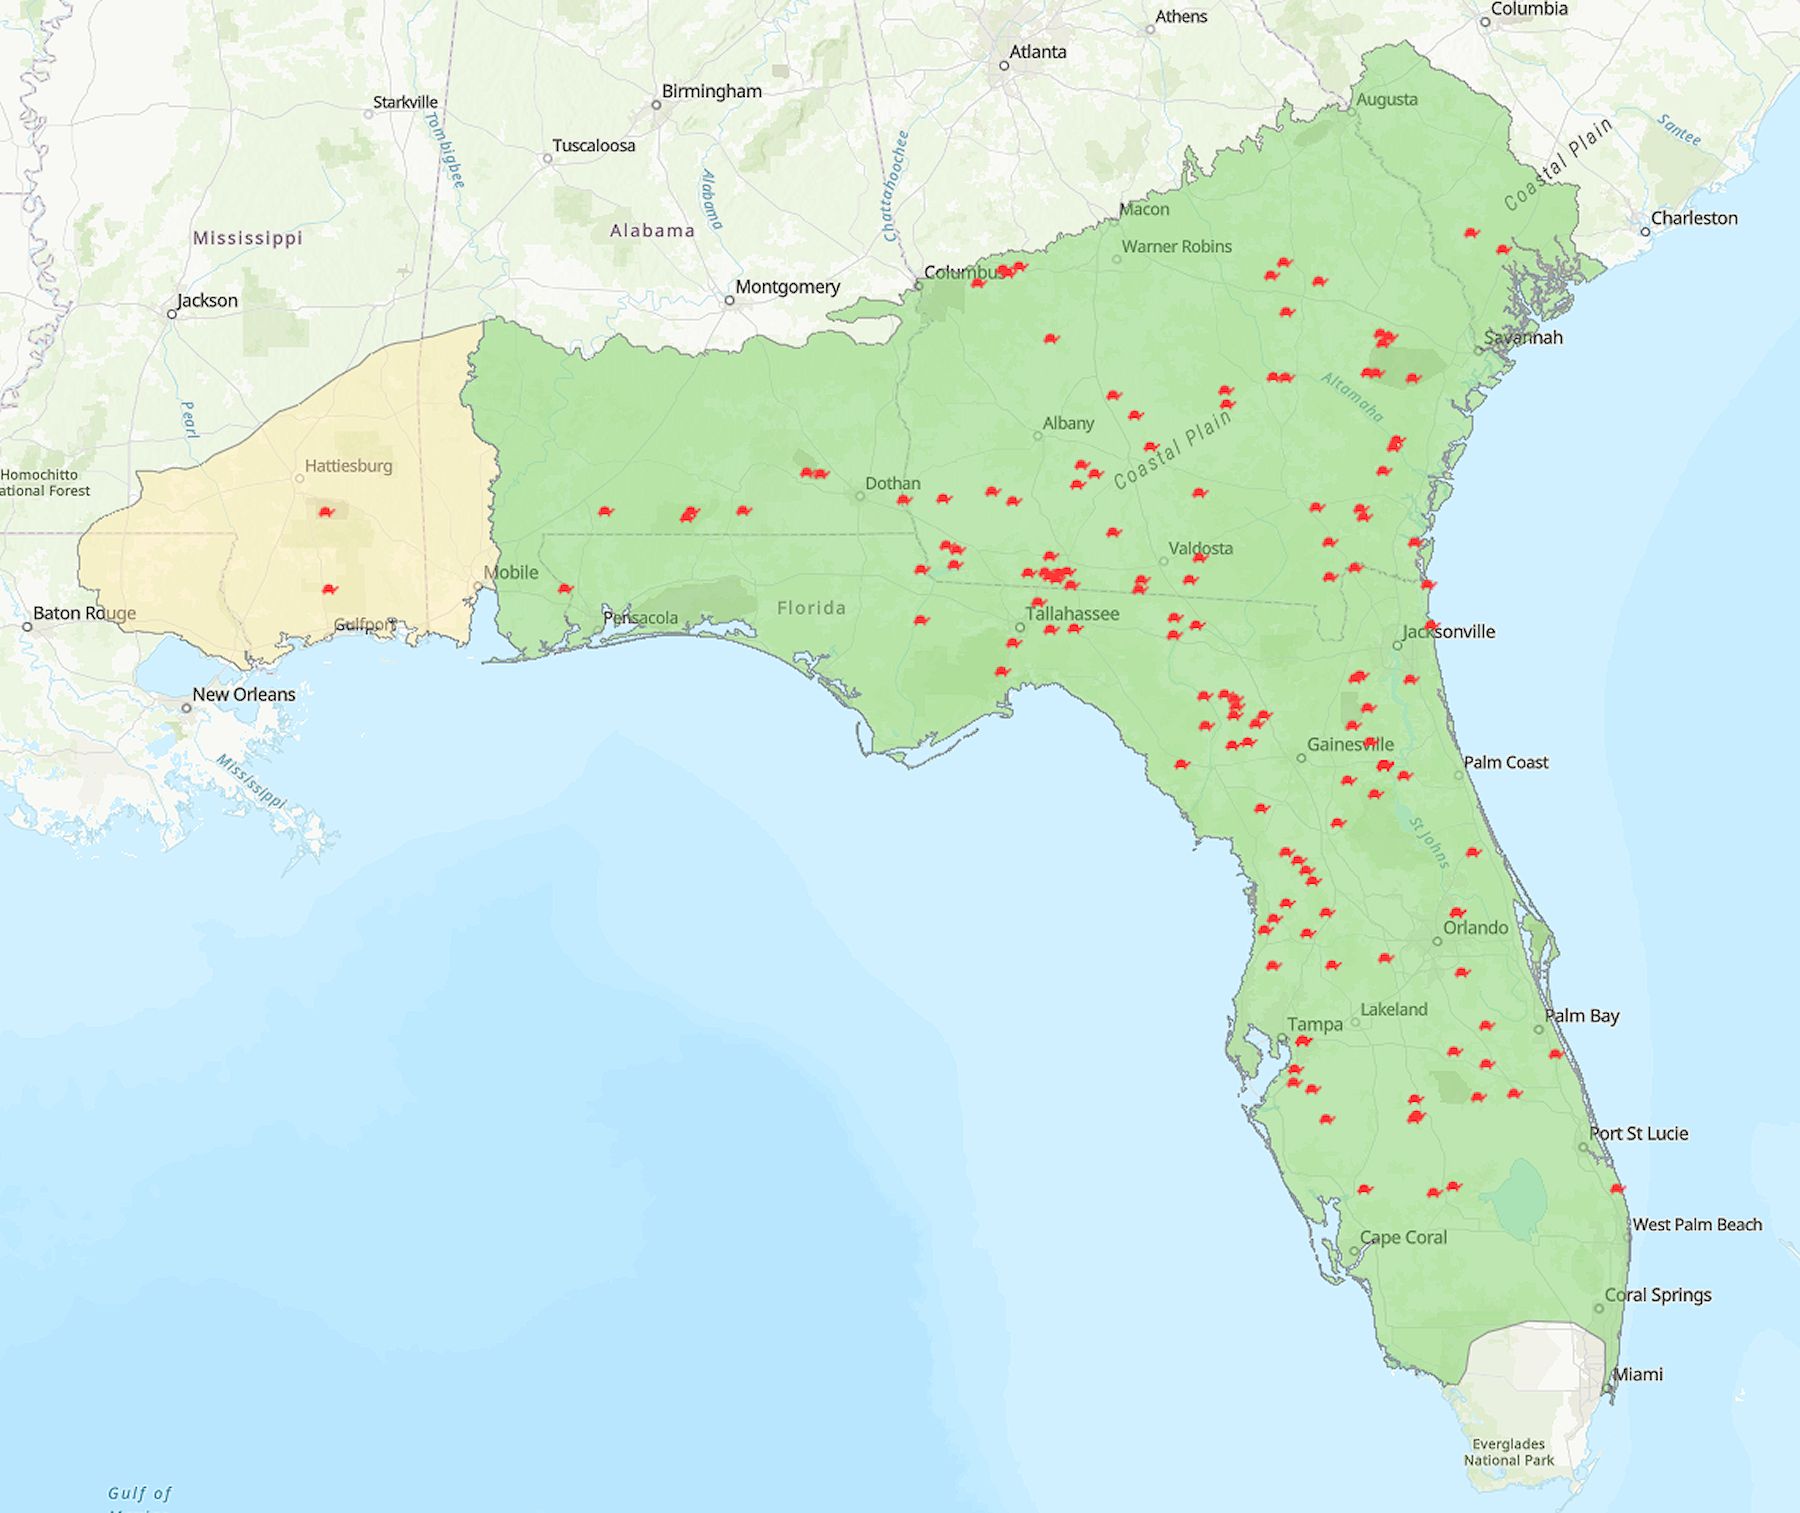 The range of the gopher tortoise, the only native tortoise east of the Mississippi River. Photo credit: US Fish and Wildlife Service.